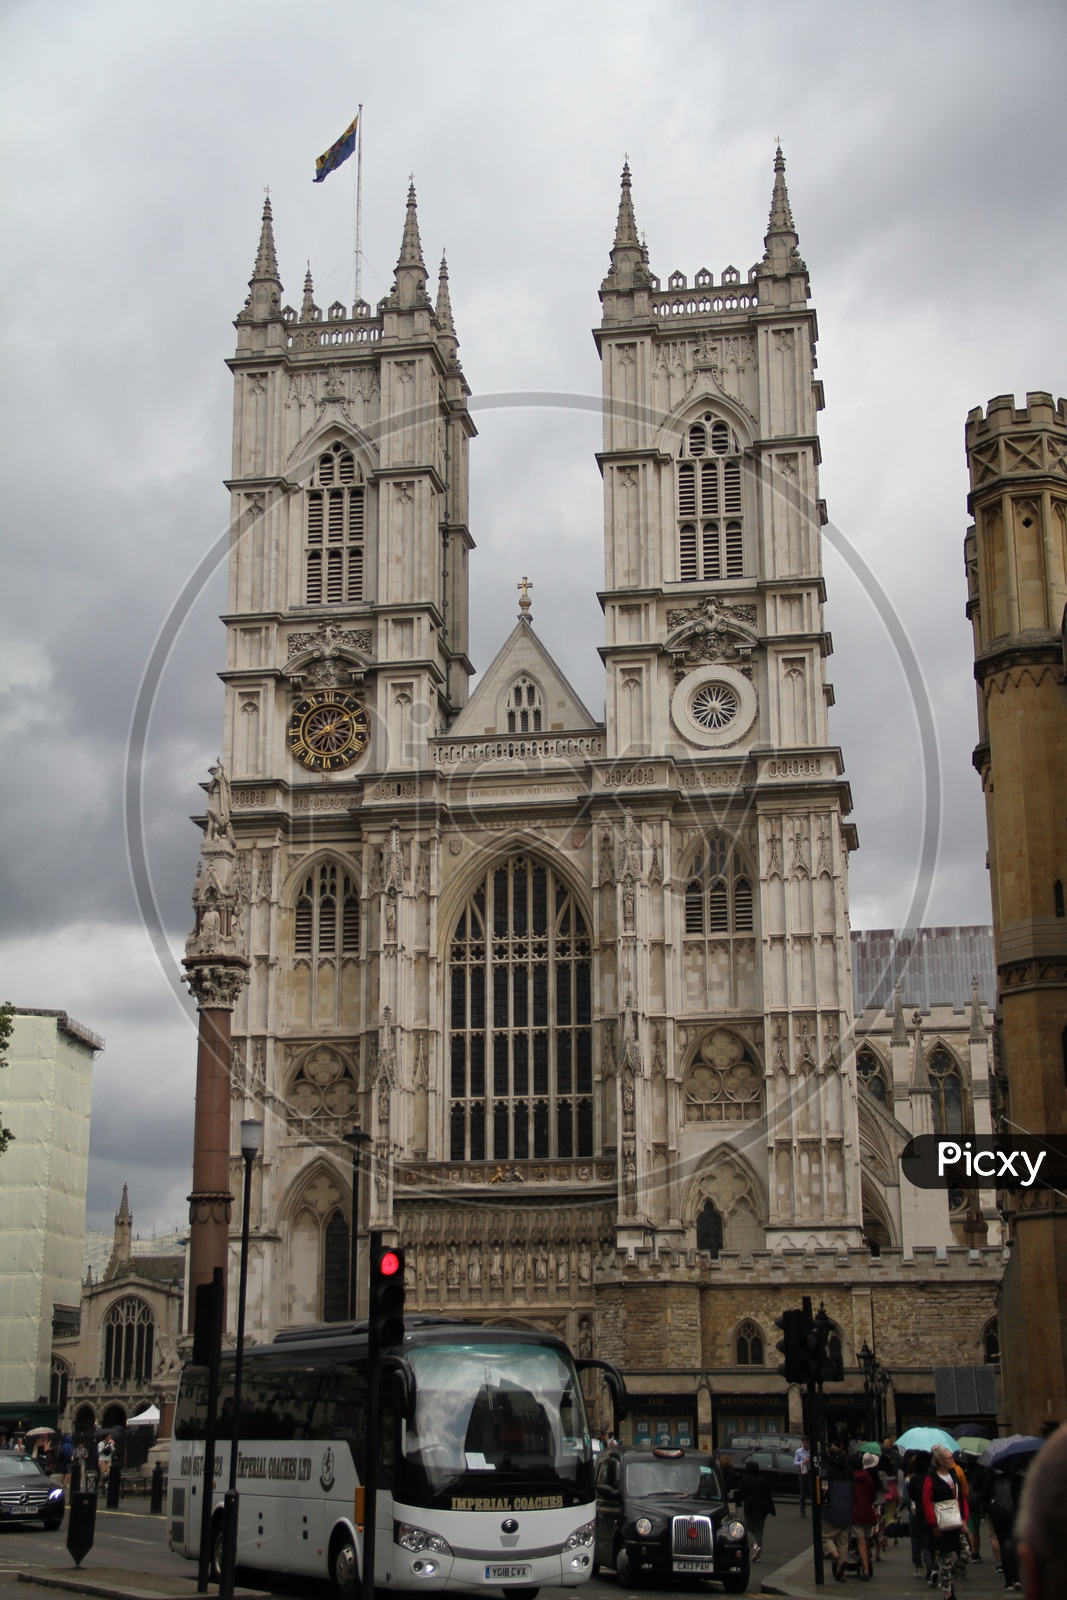 Westminster Abbey or Collegiate church in London